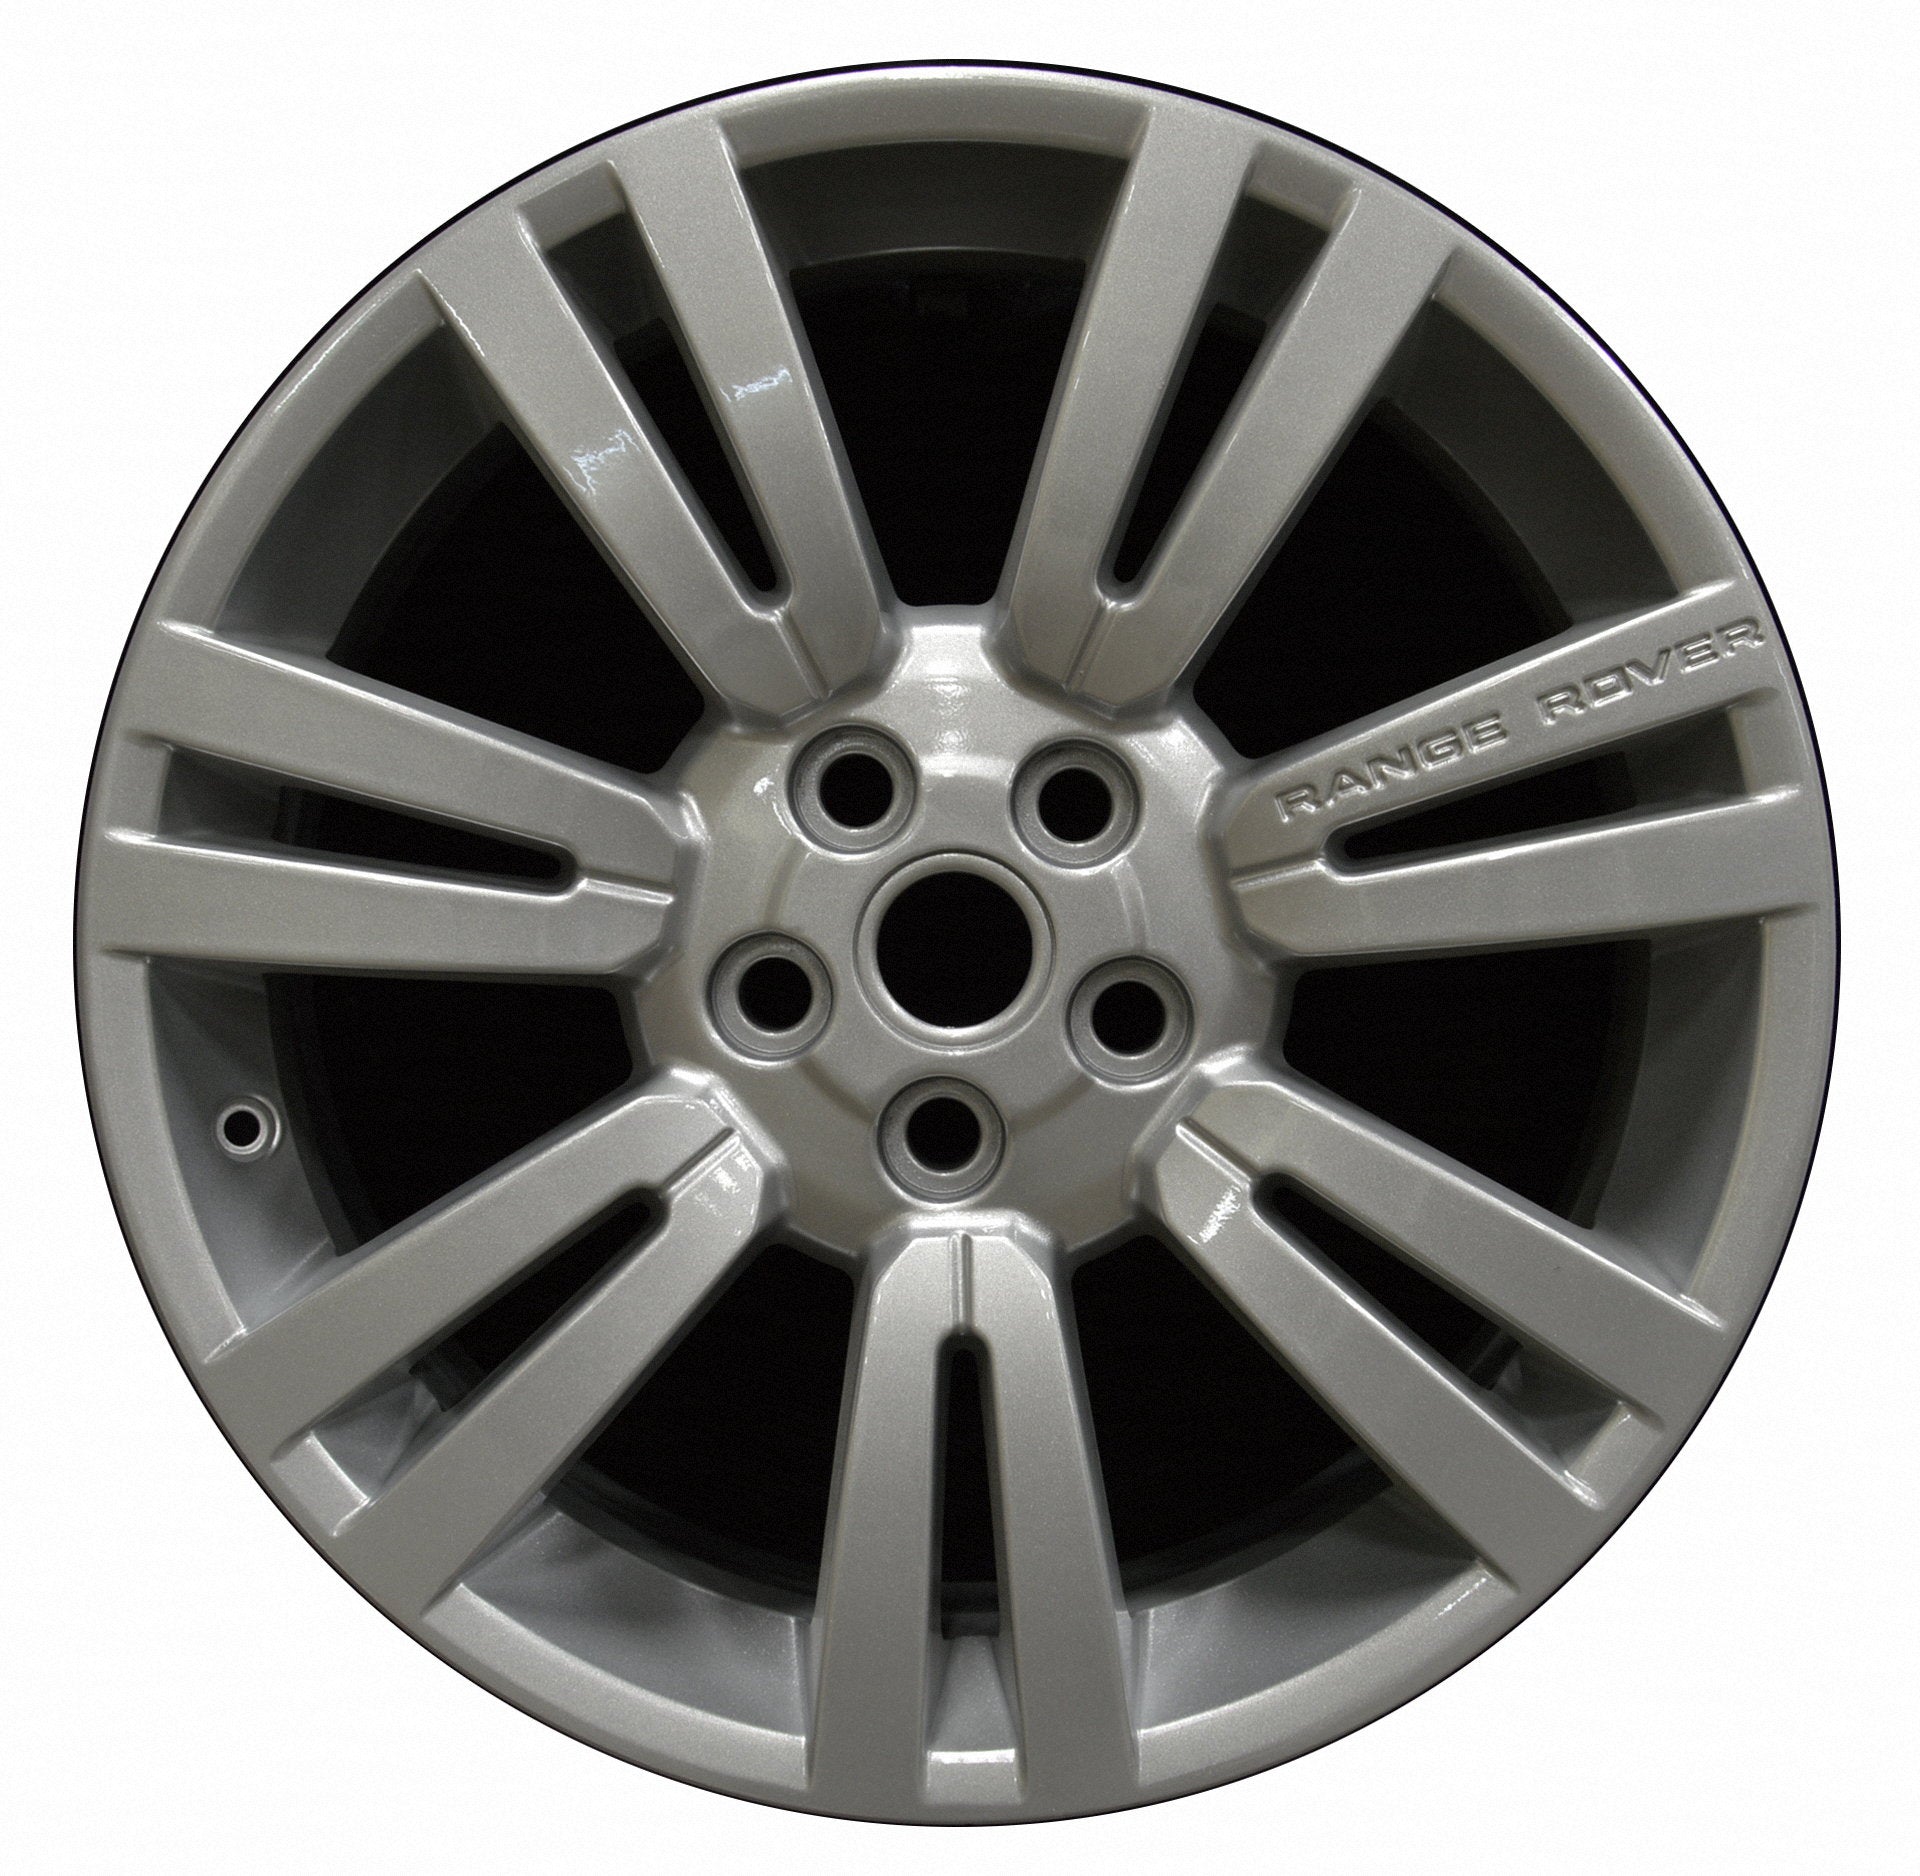 Land Rover Range Rover  2009, 2010, 2011, 2012 Factory OEM Car Wheel Size 20x8.5 Alloy WAO.72213.PS08.FF